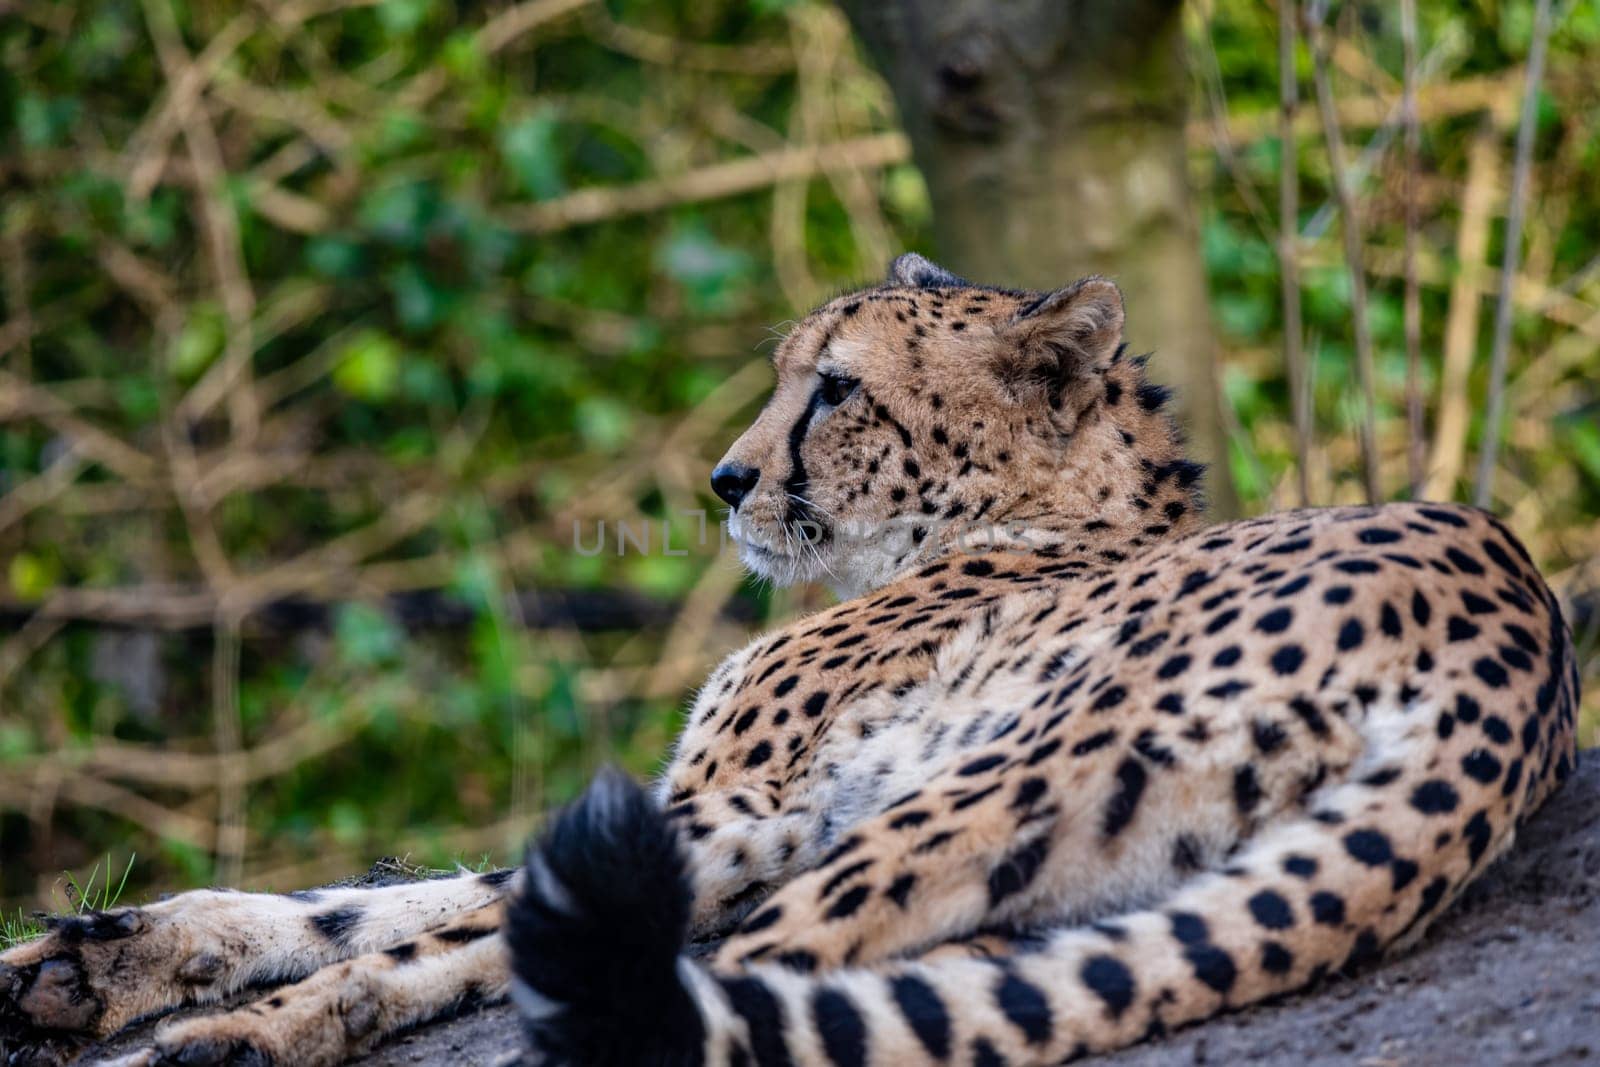 A close up photograph of a single cheetah lying on a rock. Young cheetah relaxing in forest on stone